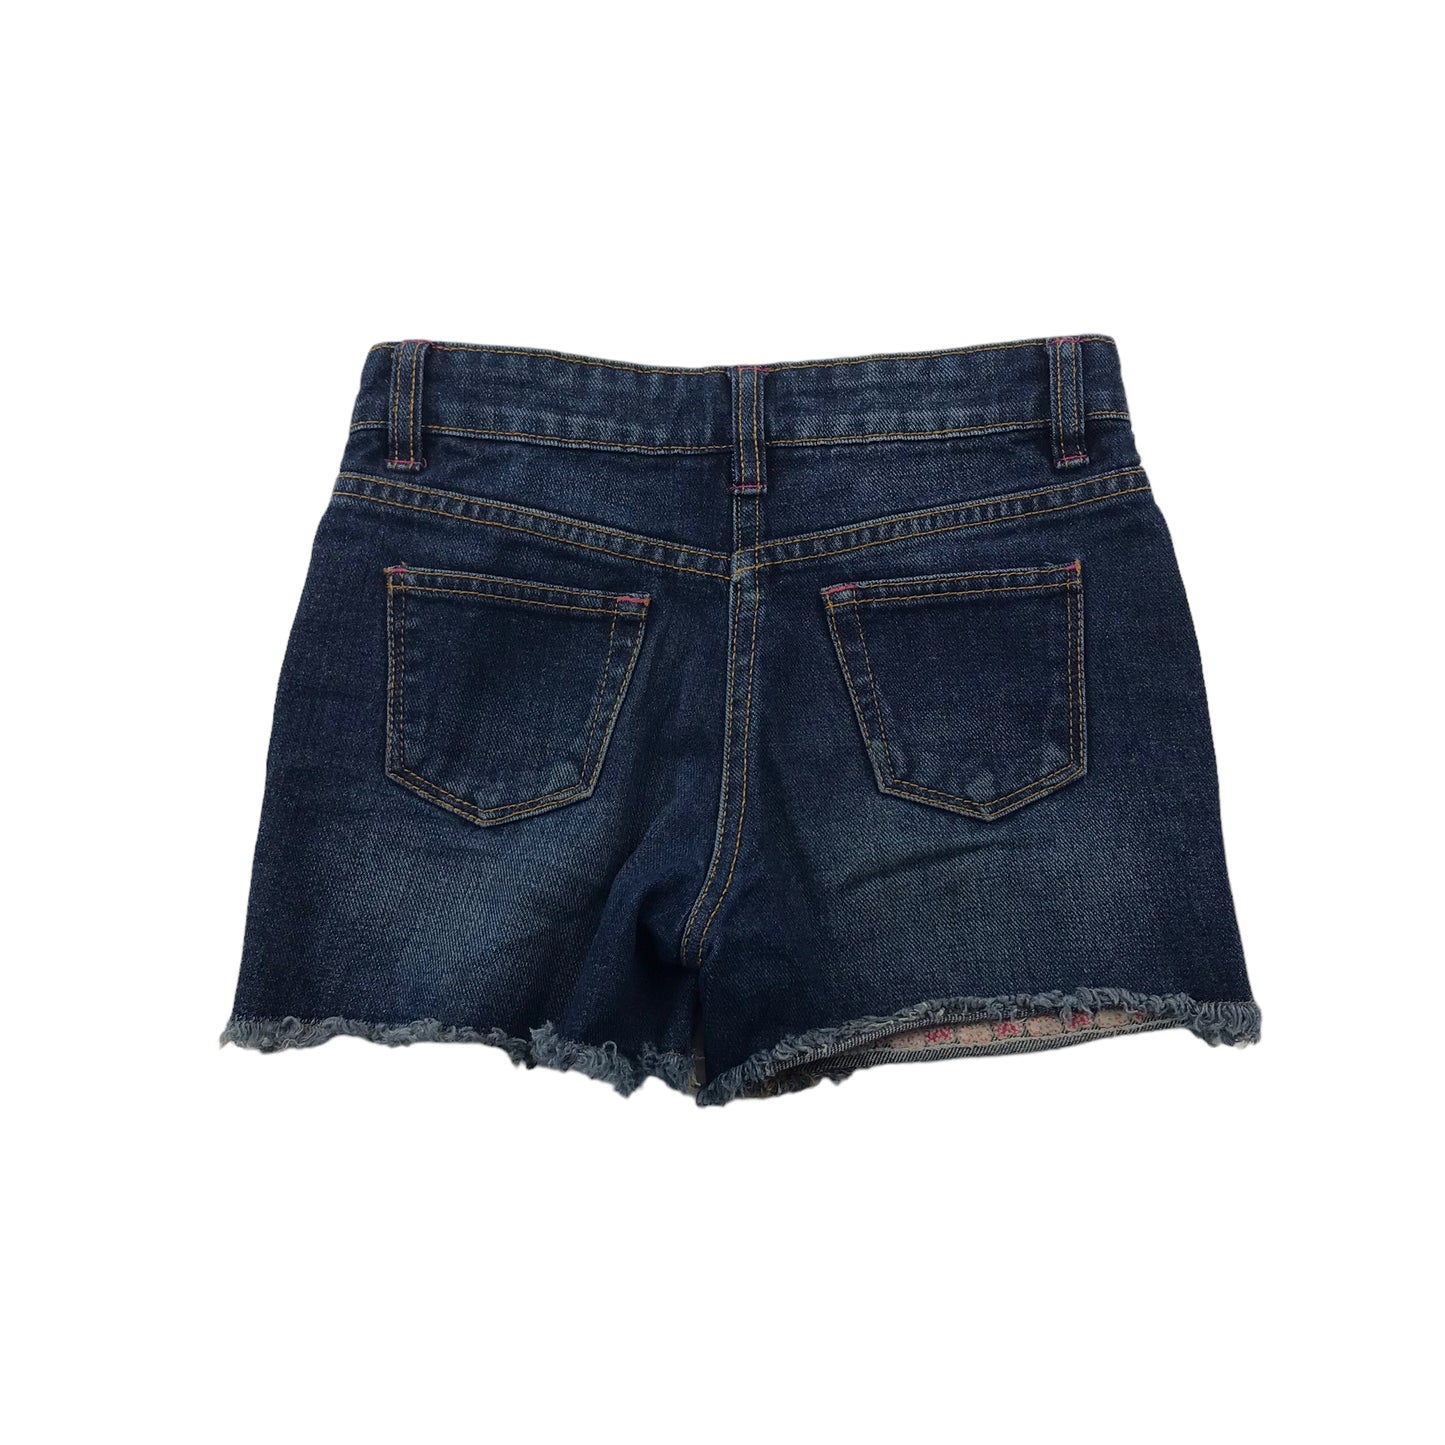 Matalan Navy Denim Shorts with Pink Embroidery Detailing Age 6